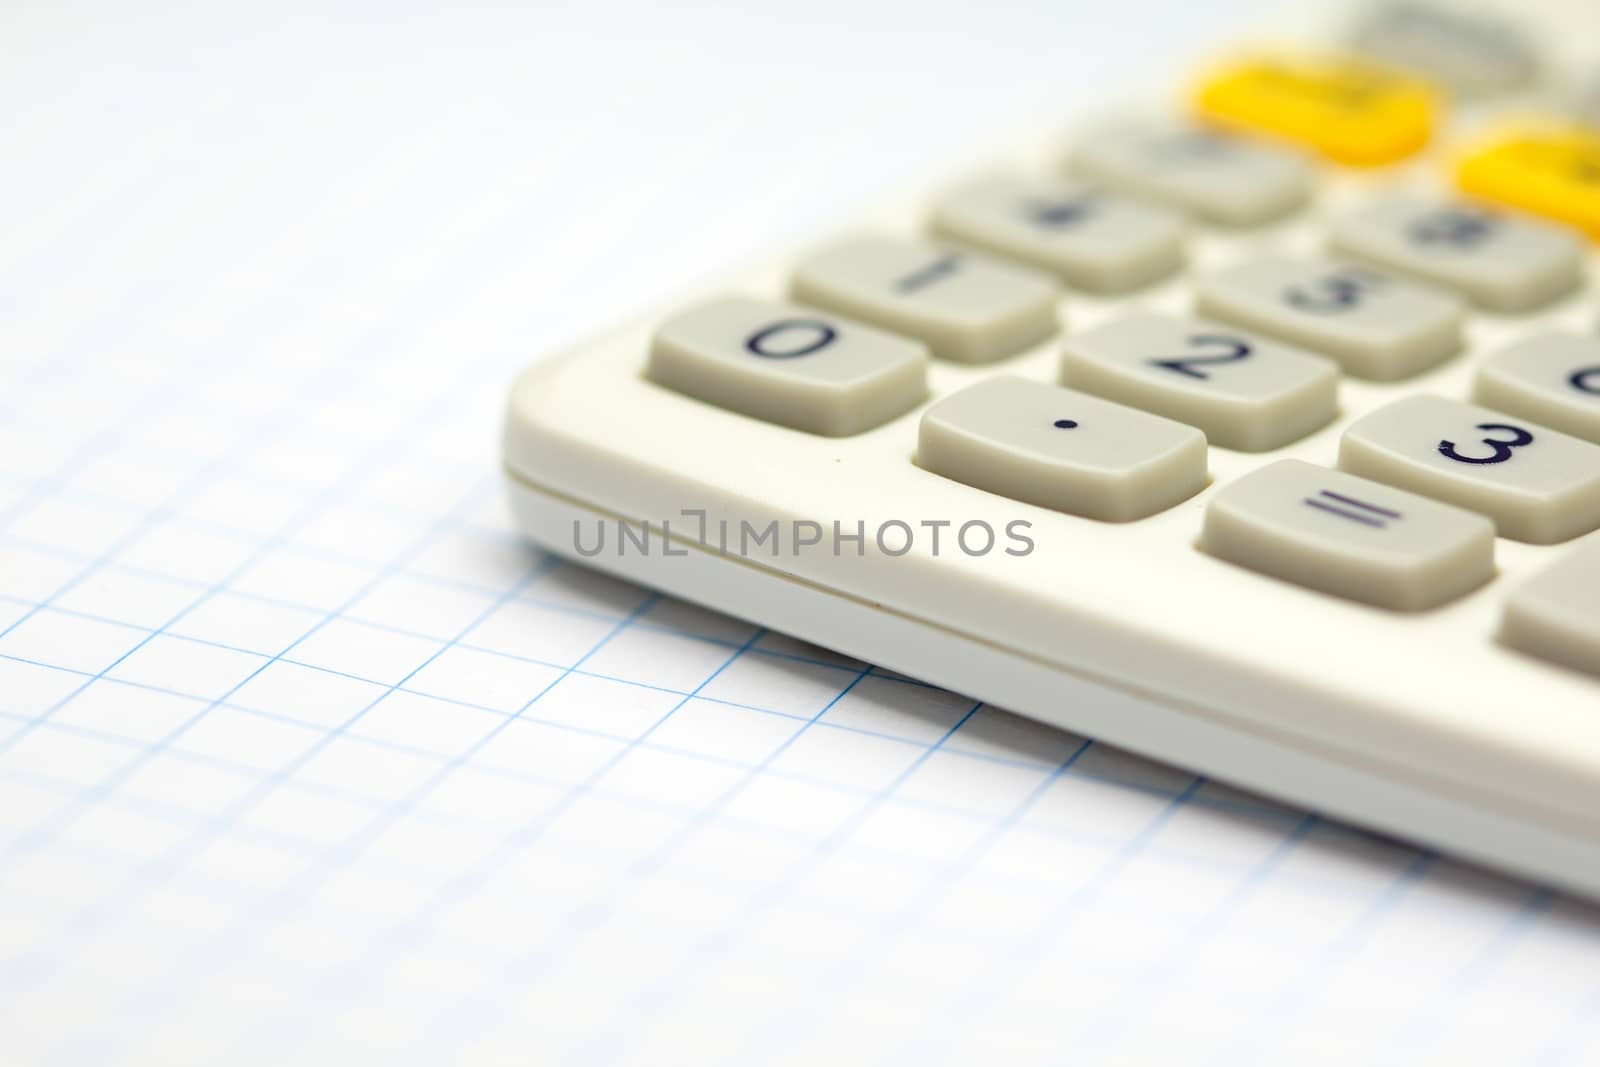 Photo shows a closeup of business calculator on a paper.